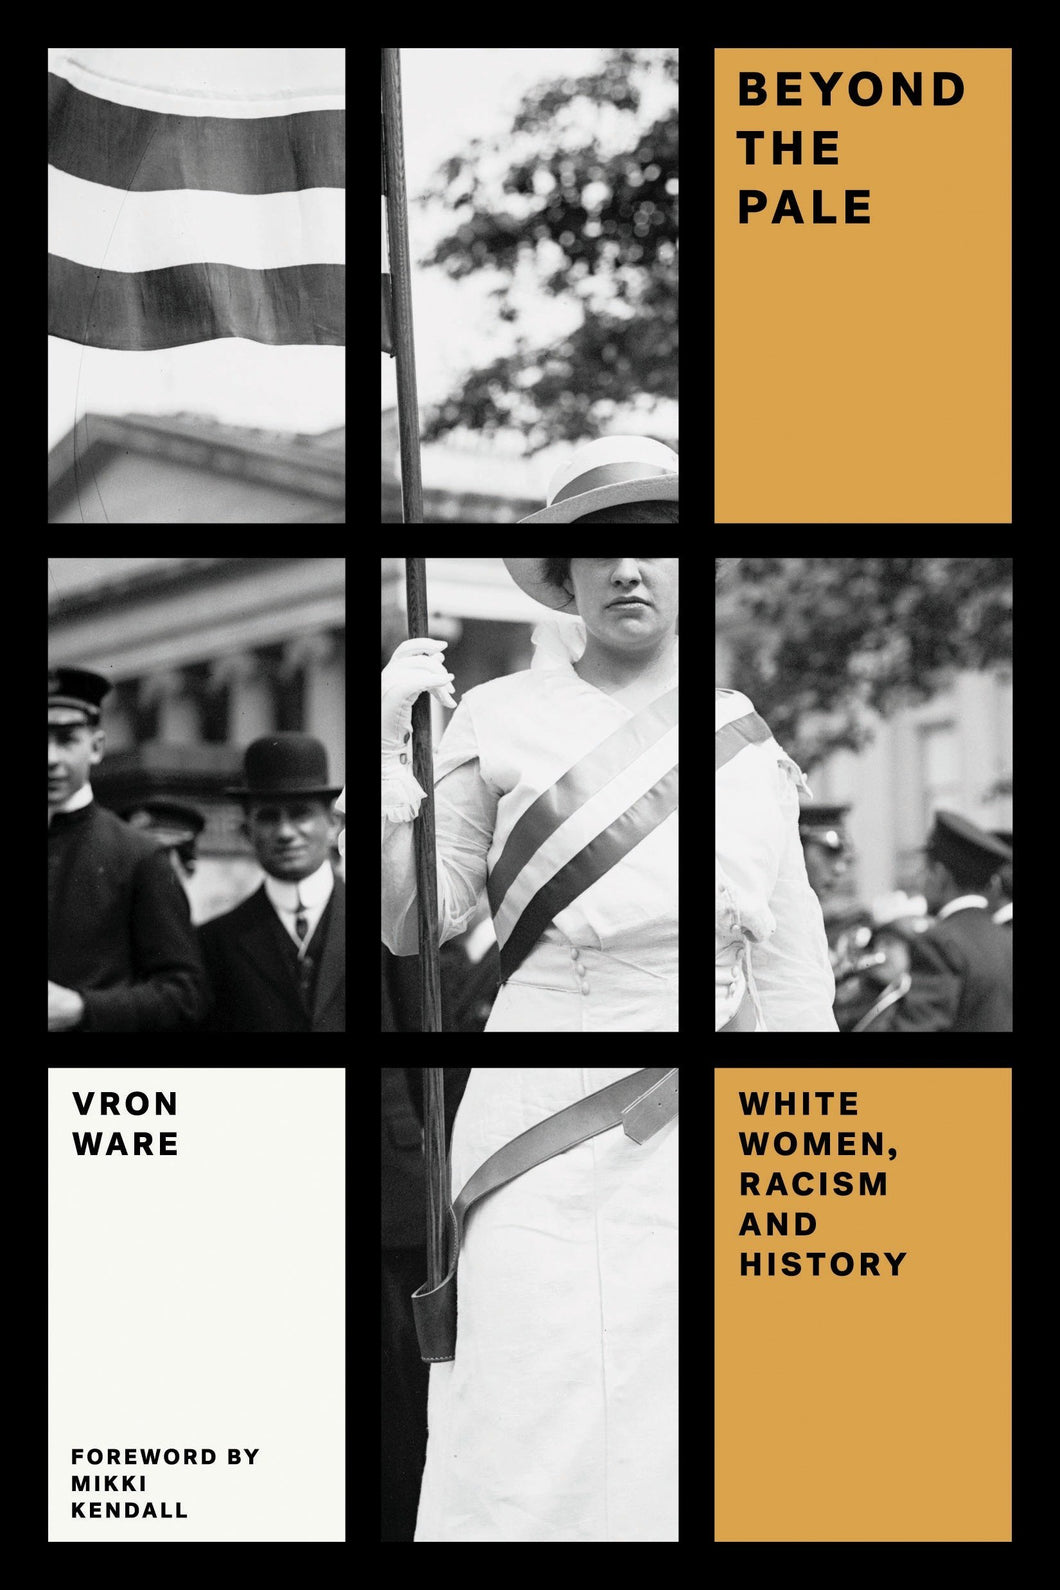 Beyond the Pale: White Women, Racism, and History by Vron Ware